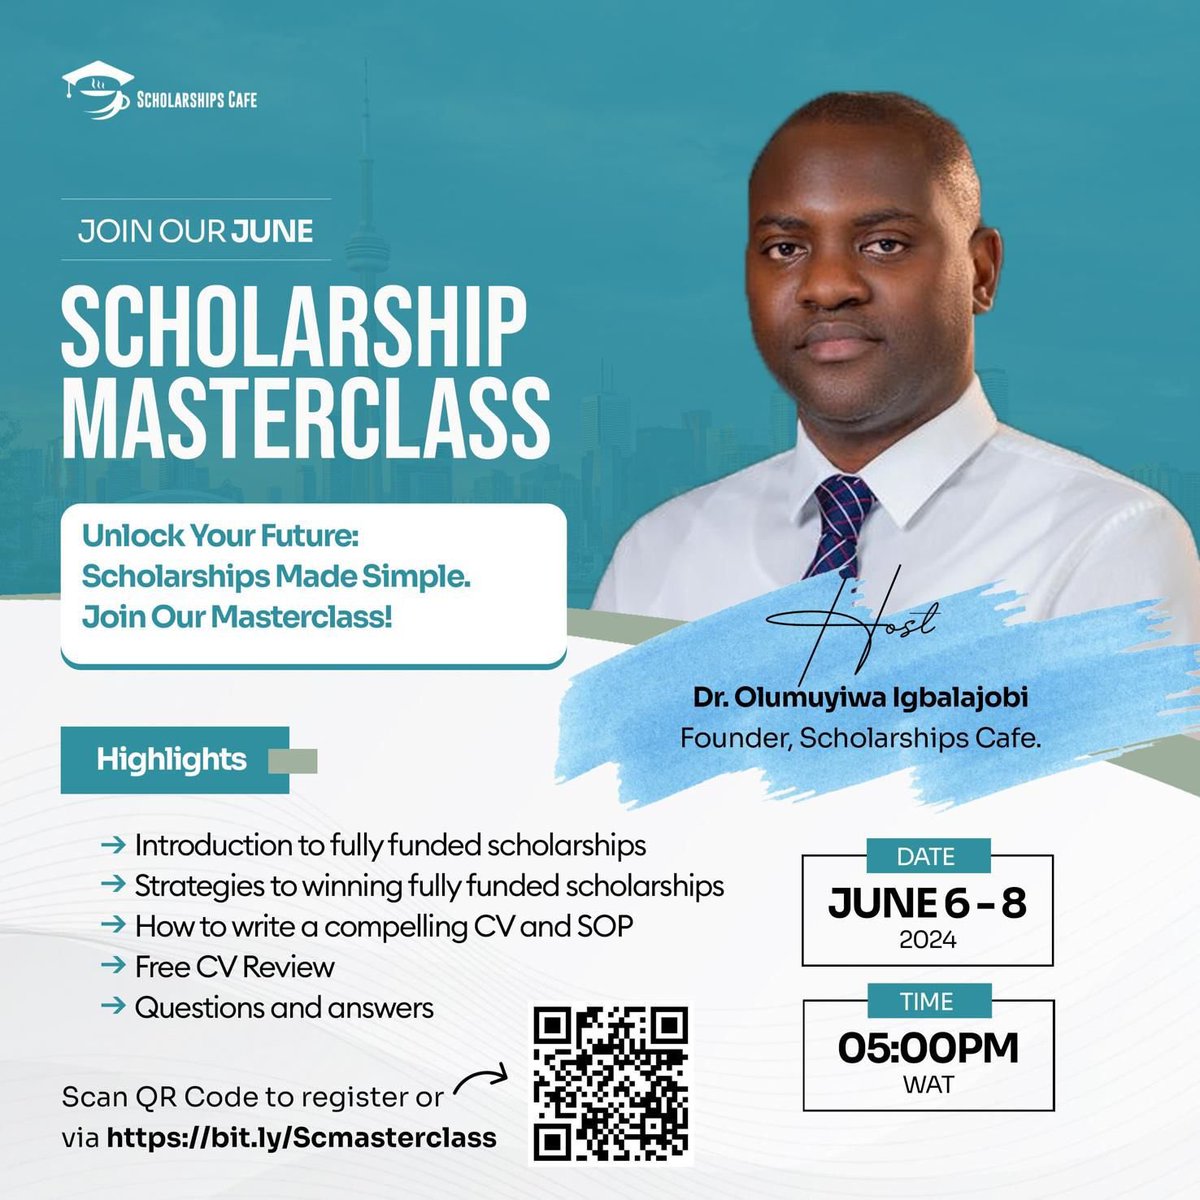 Are you searching for scholarships to no avail, or do you not know where to start? Join our June scholarship masterclass, and let's support you!

Benefits
- Free CV and cold email reviews 
- Access to our scholarship academy 
- Monthly meetings
- Learn strategies to identify